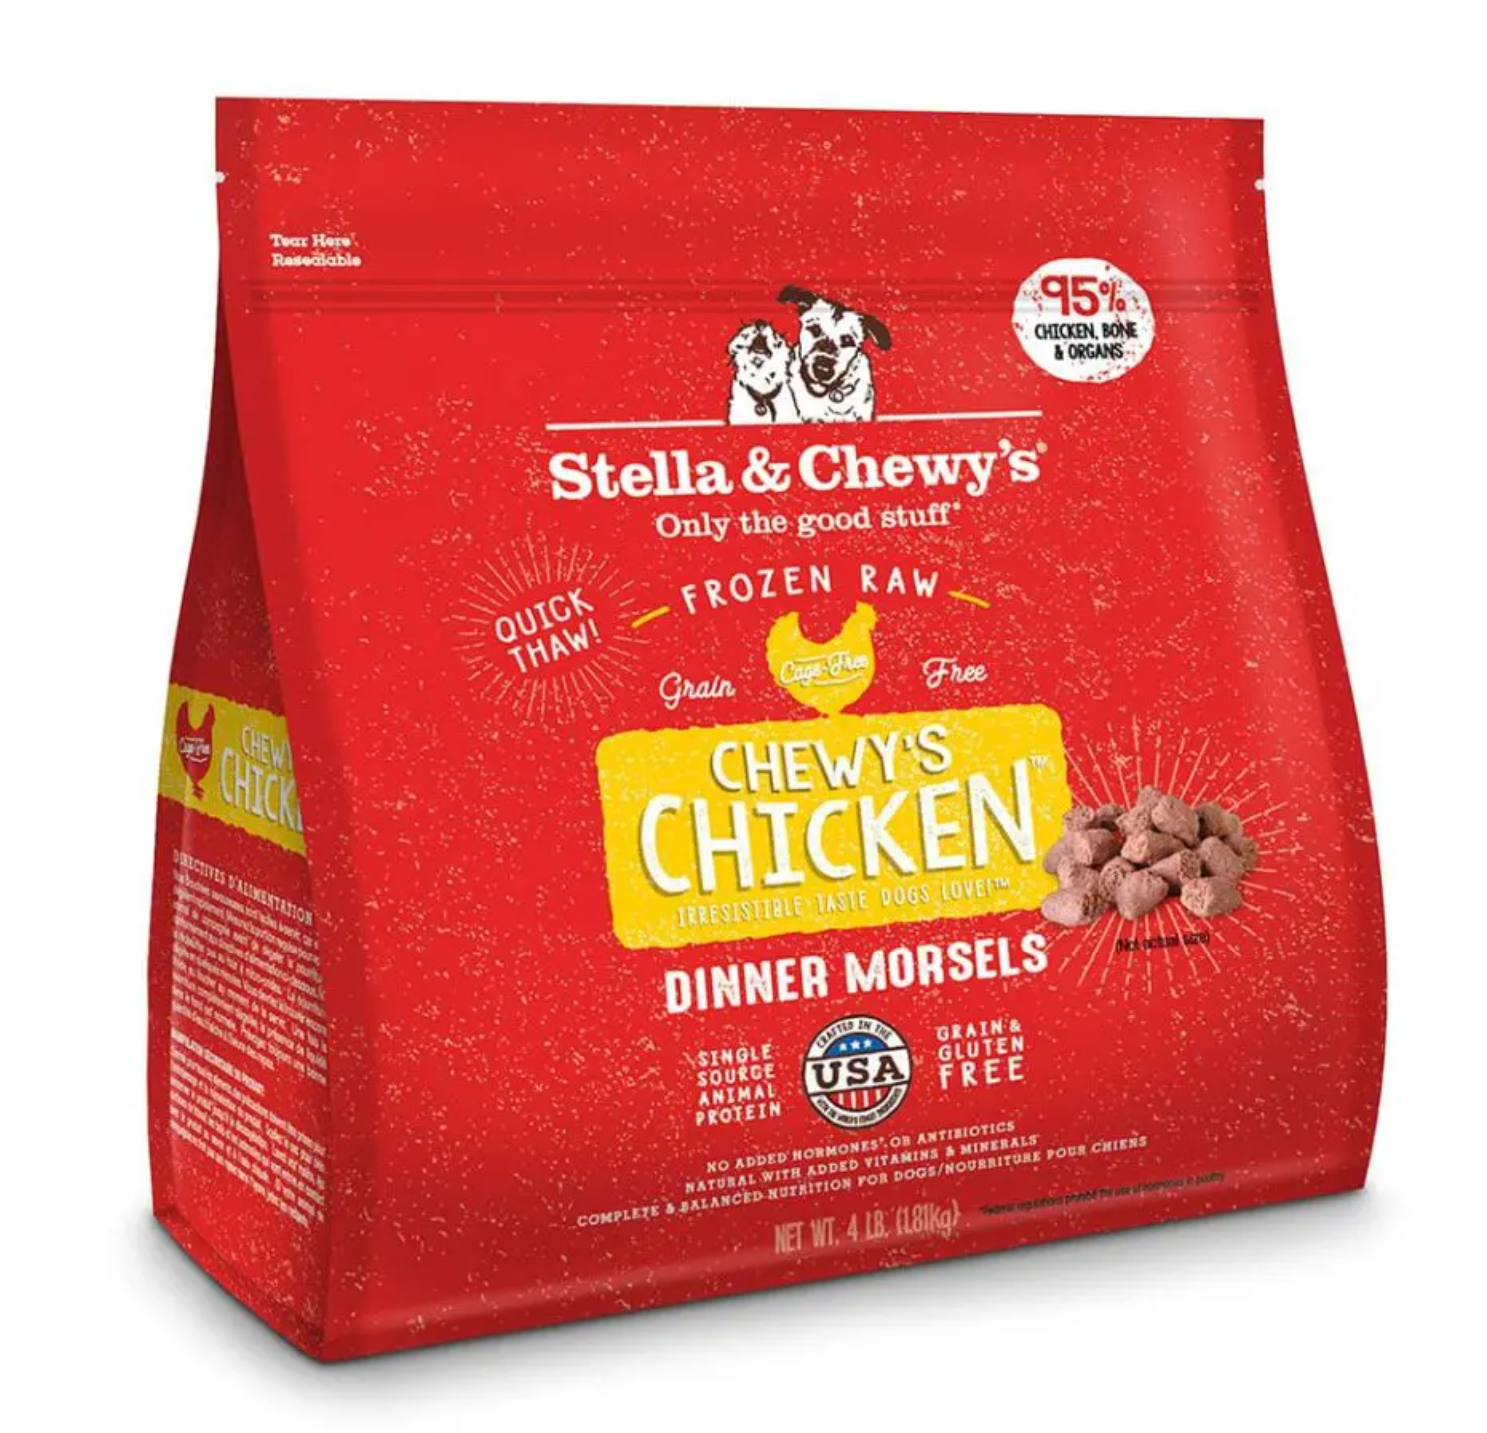 Stella & Chewy's Frozen Dinner Morsels Chicken for Dogs